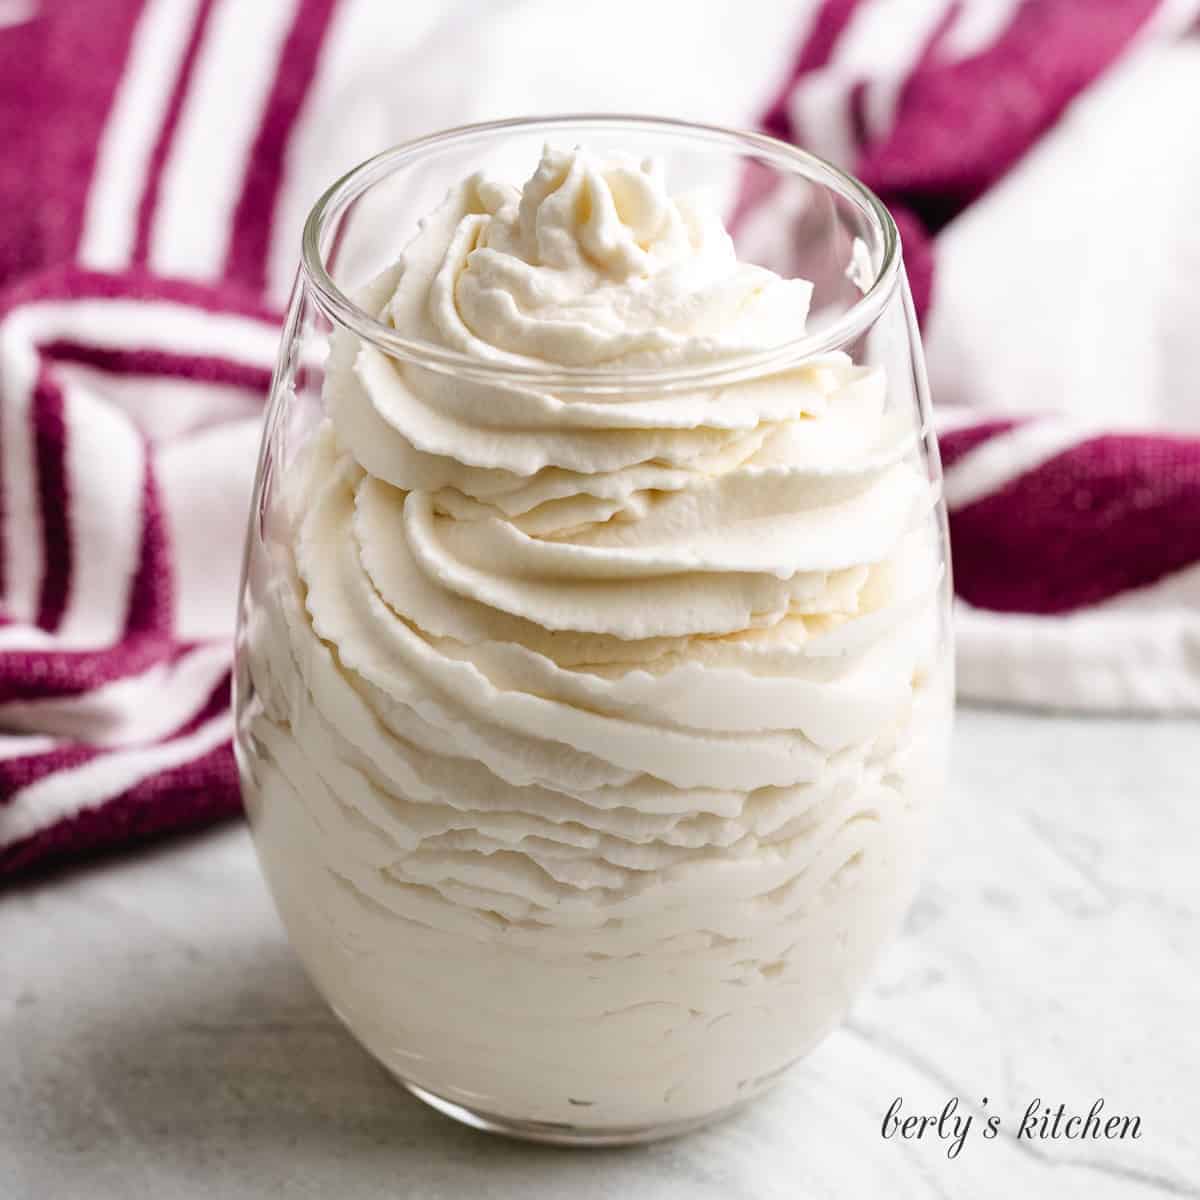 The bourbon whipped cream in a glass.